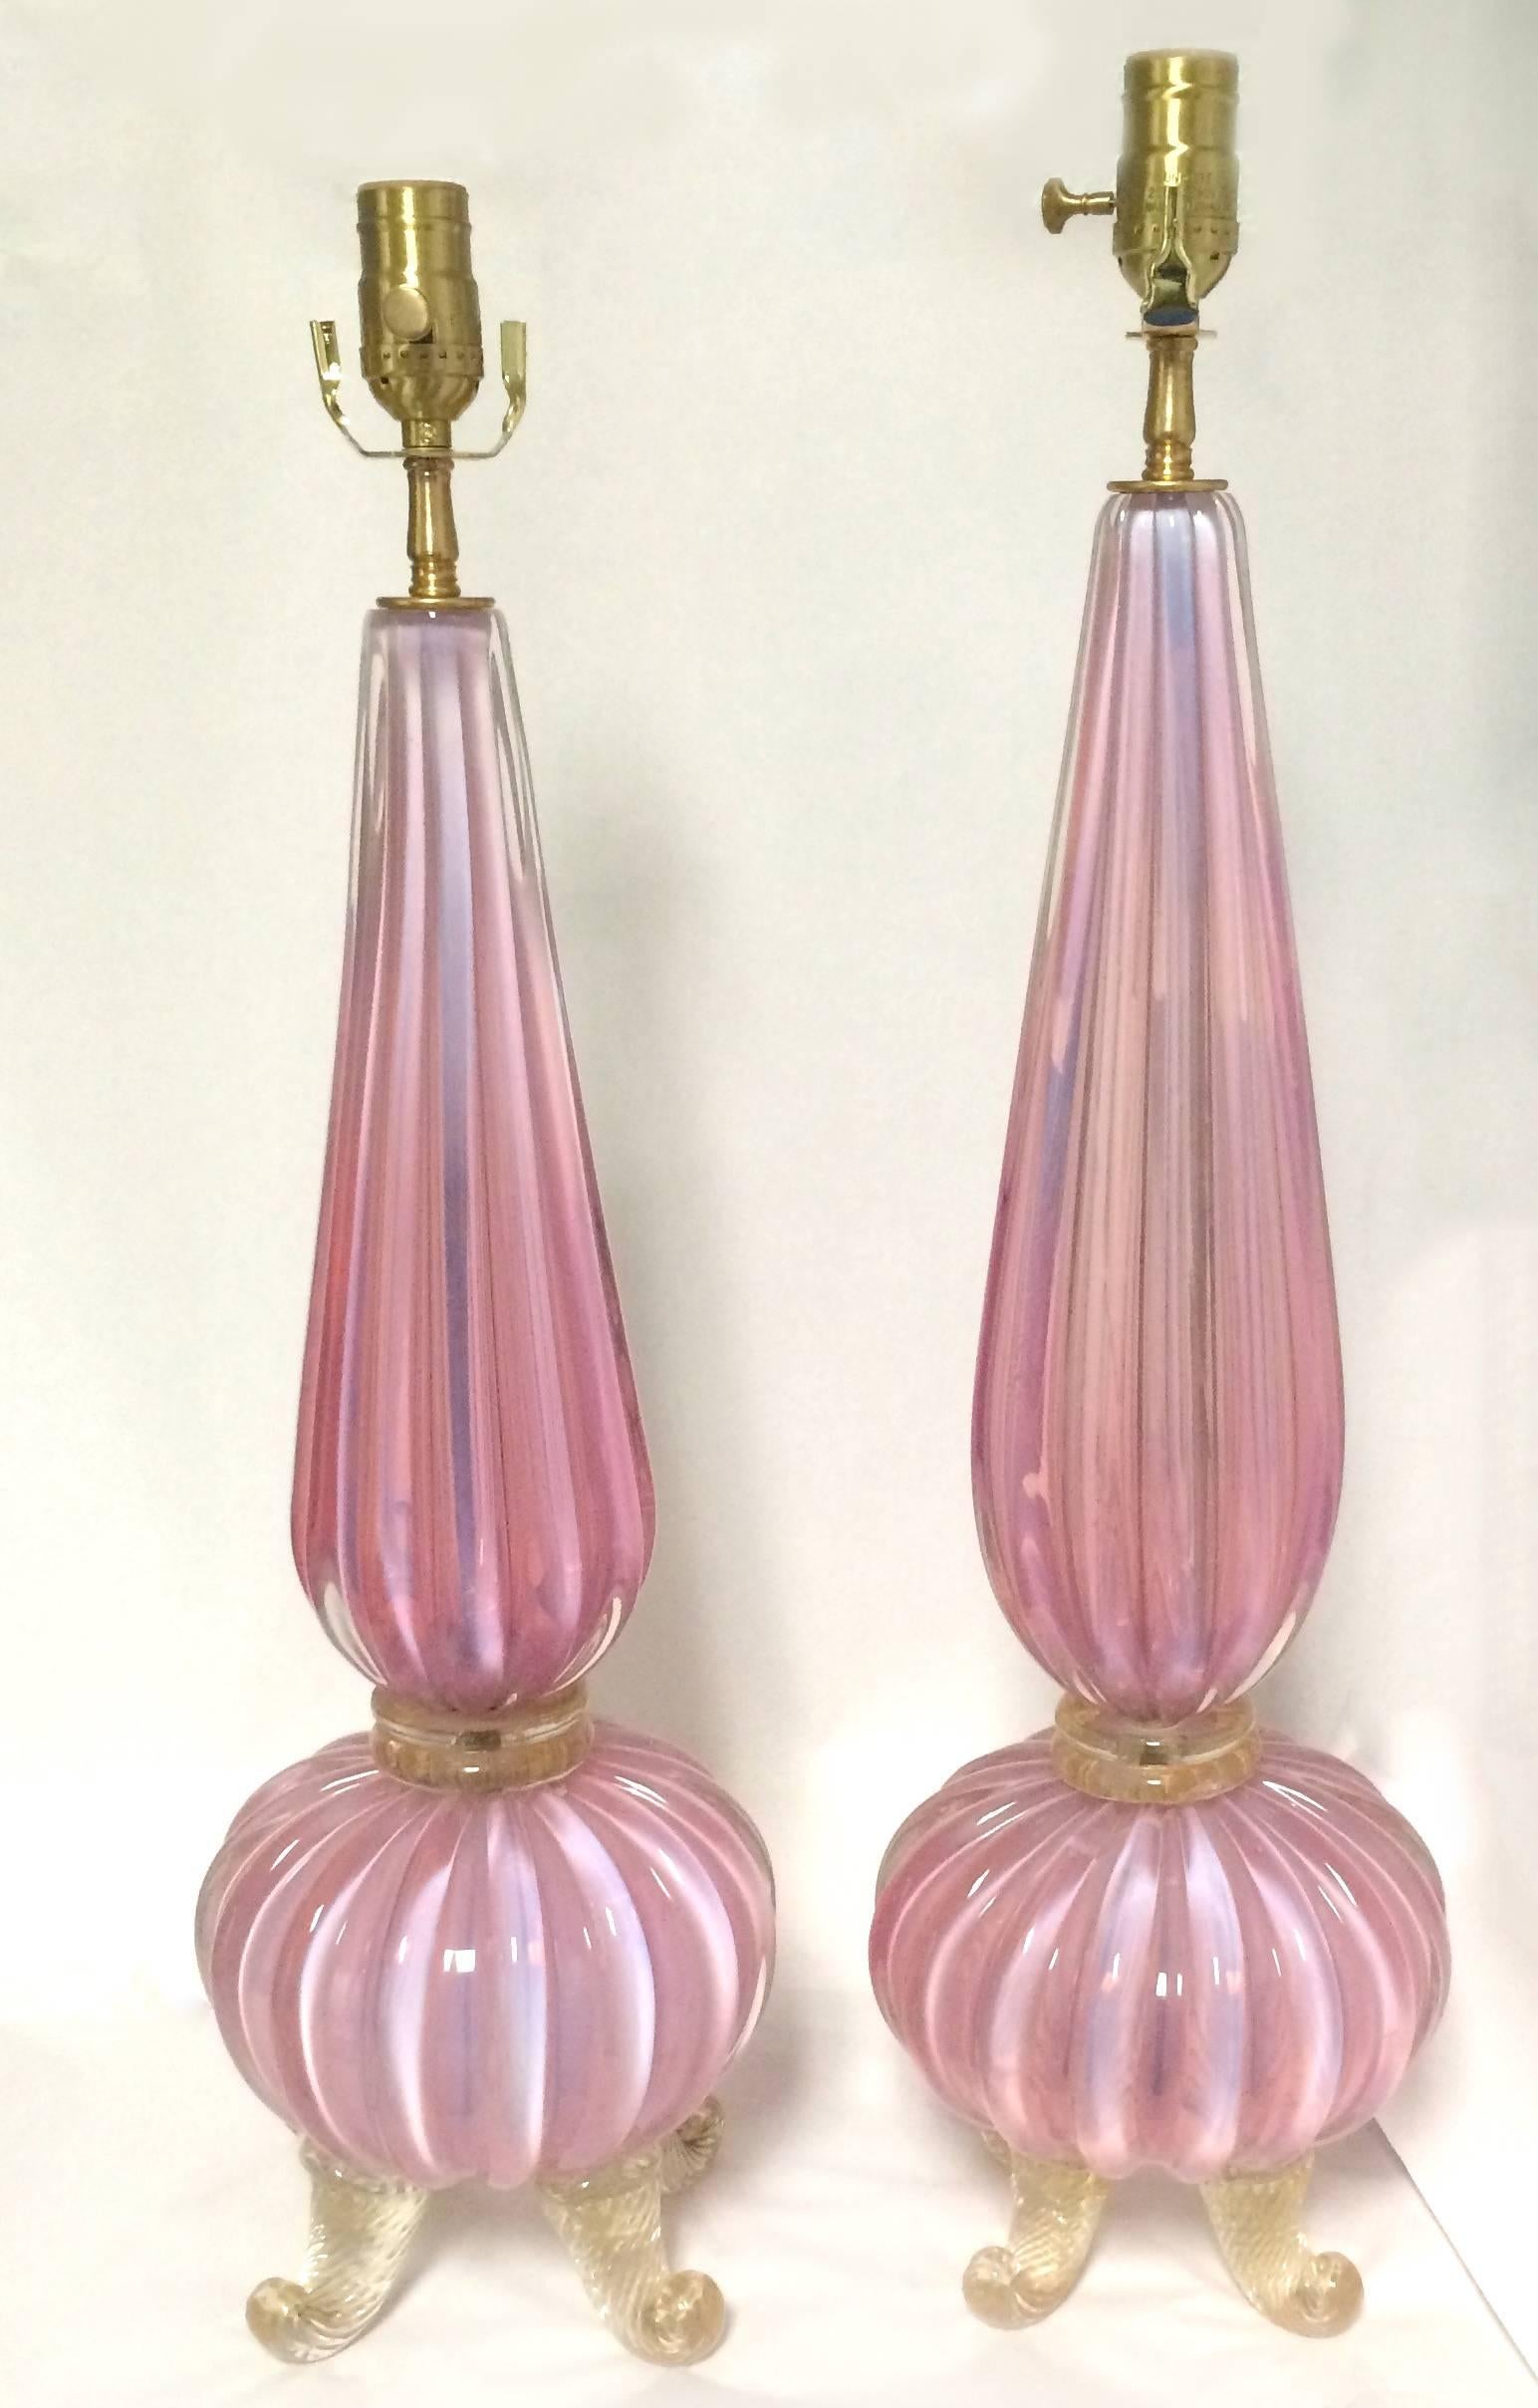 Pair of Mid-Century Murano pink glass table lamps by Barovier & Toso. Pink opalescent ribbed glass. Curvy gold flecked dolphin-footed base. Newly rewired, each lamp takes one standard bulb.
There is a 0.5